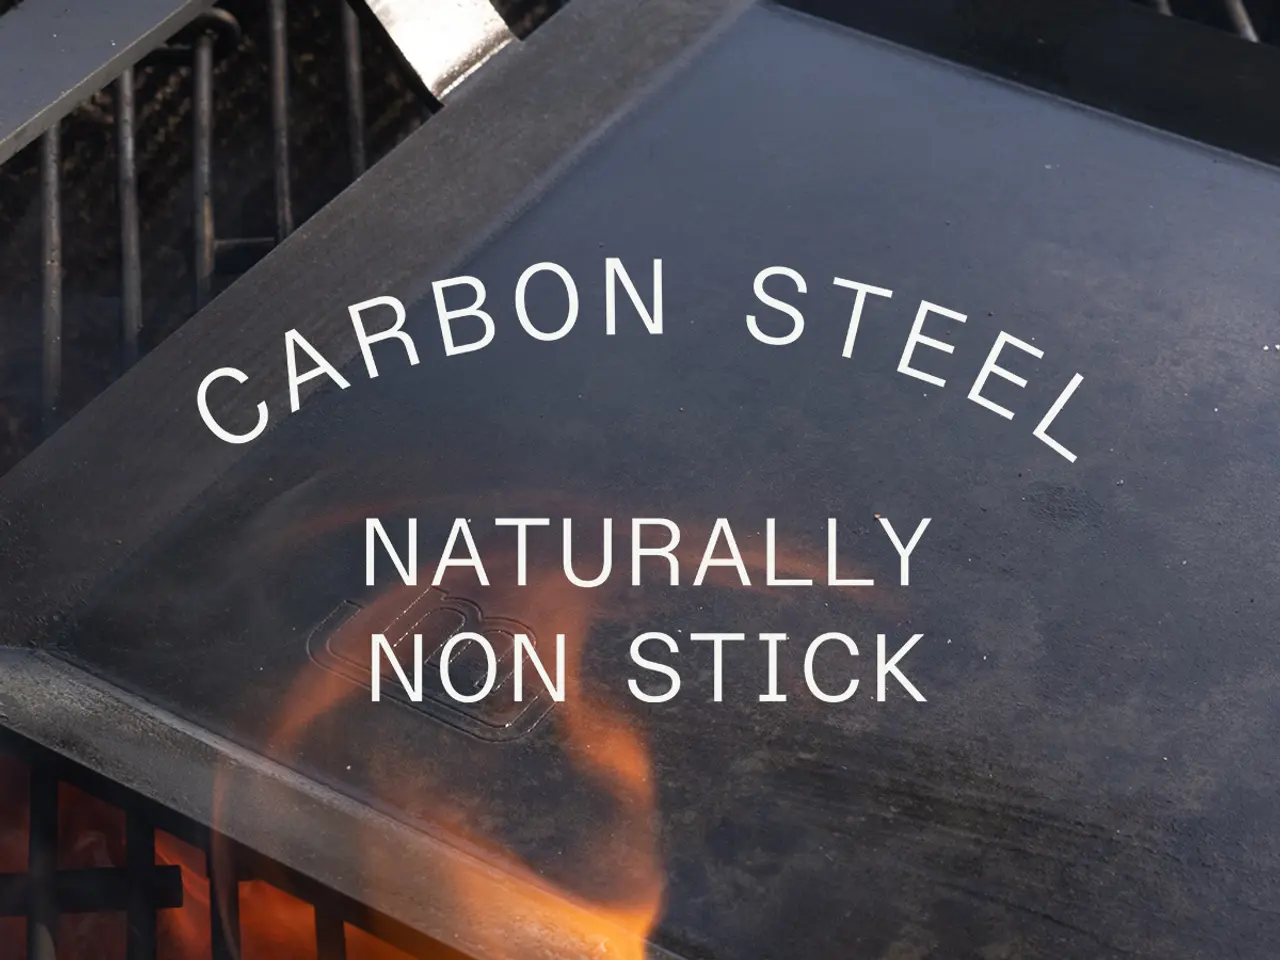 Close-up view of a label on a cookware item that reads "CARBON STEEL NATURALLY NON STICK," highlighting its material and feature.